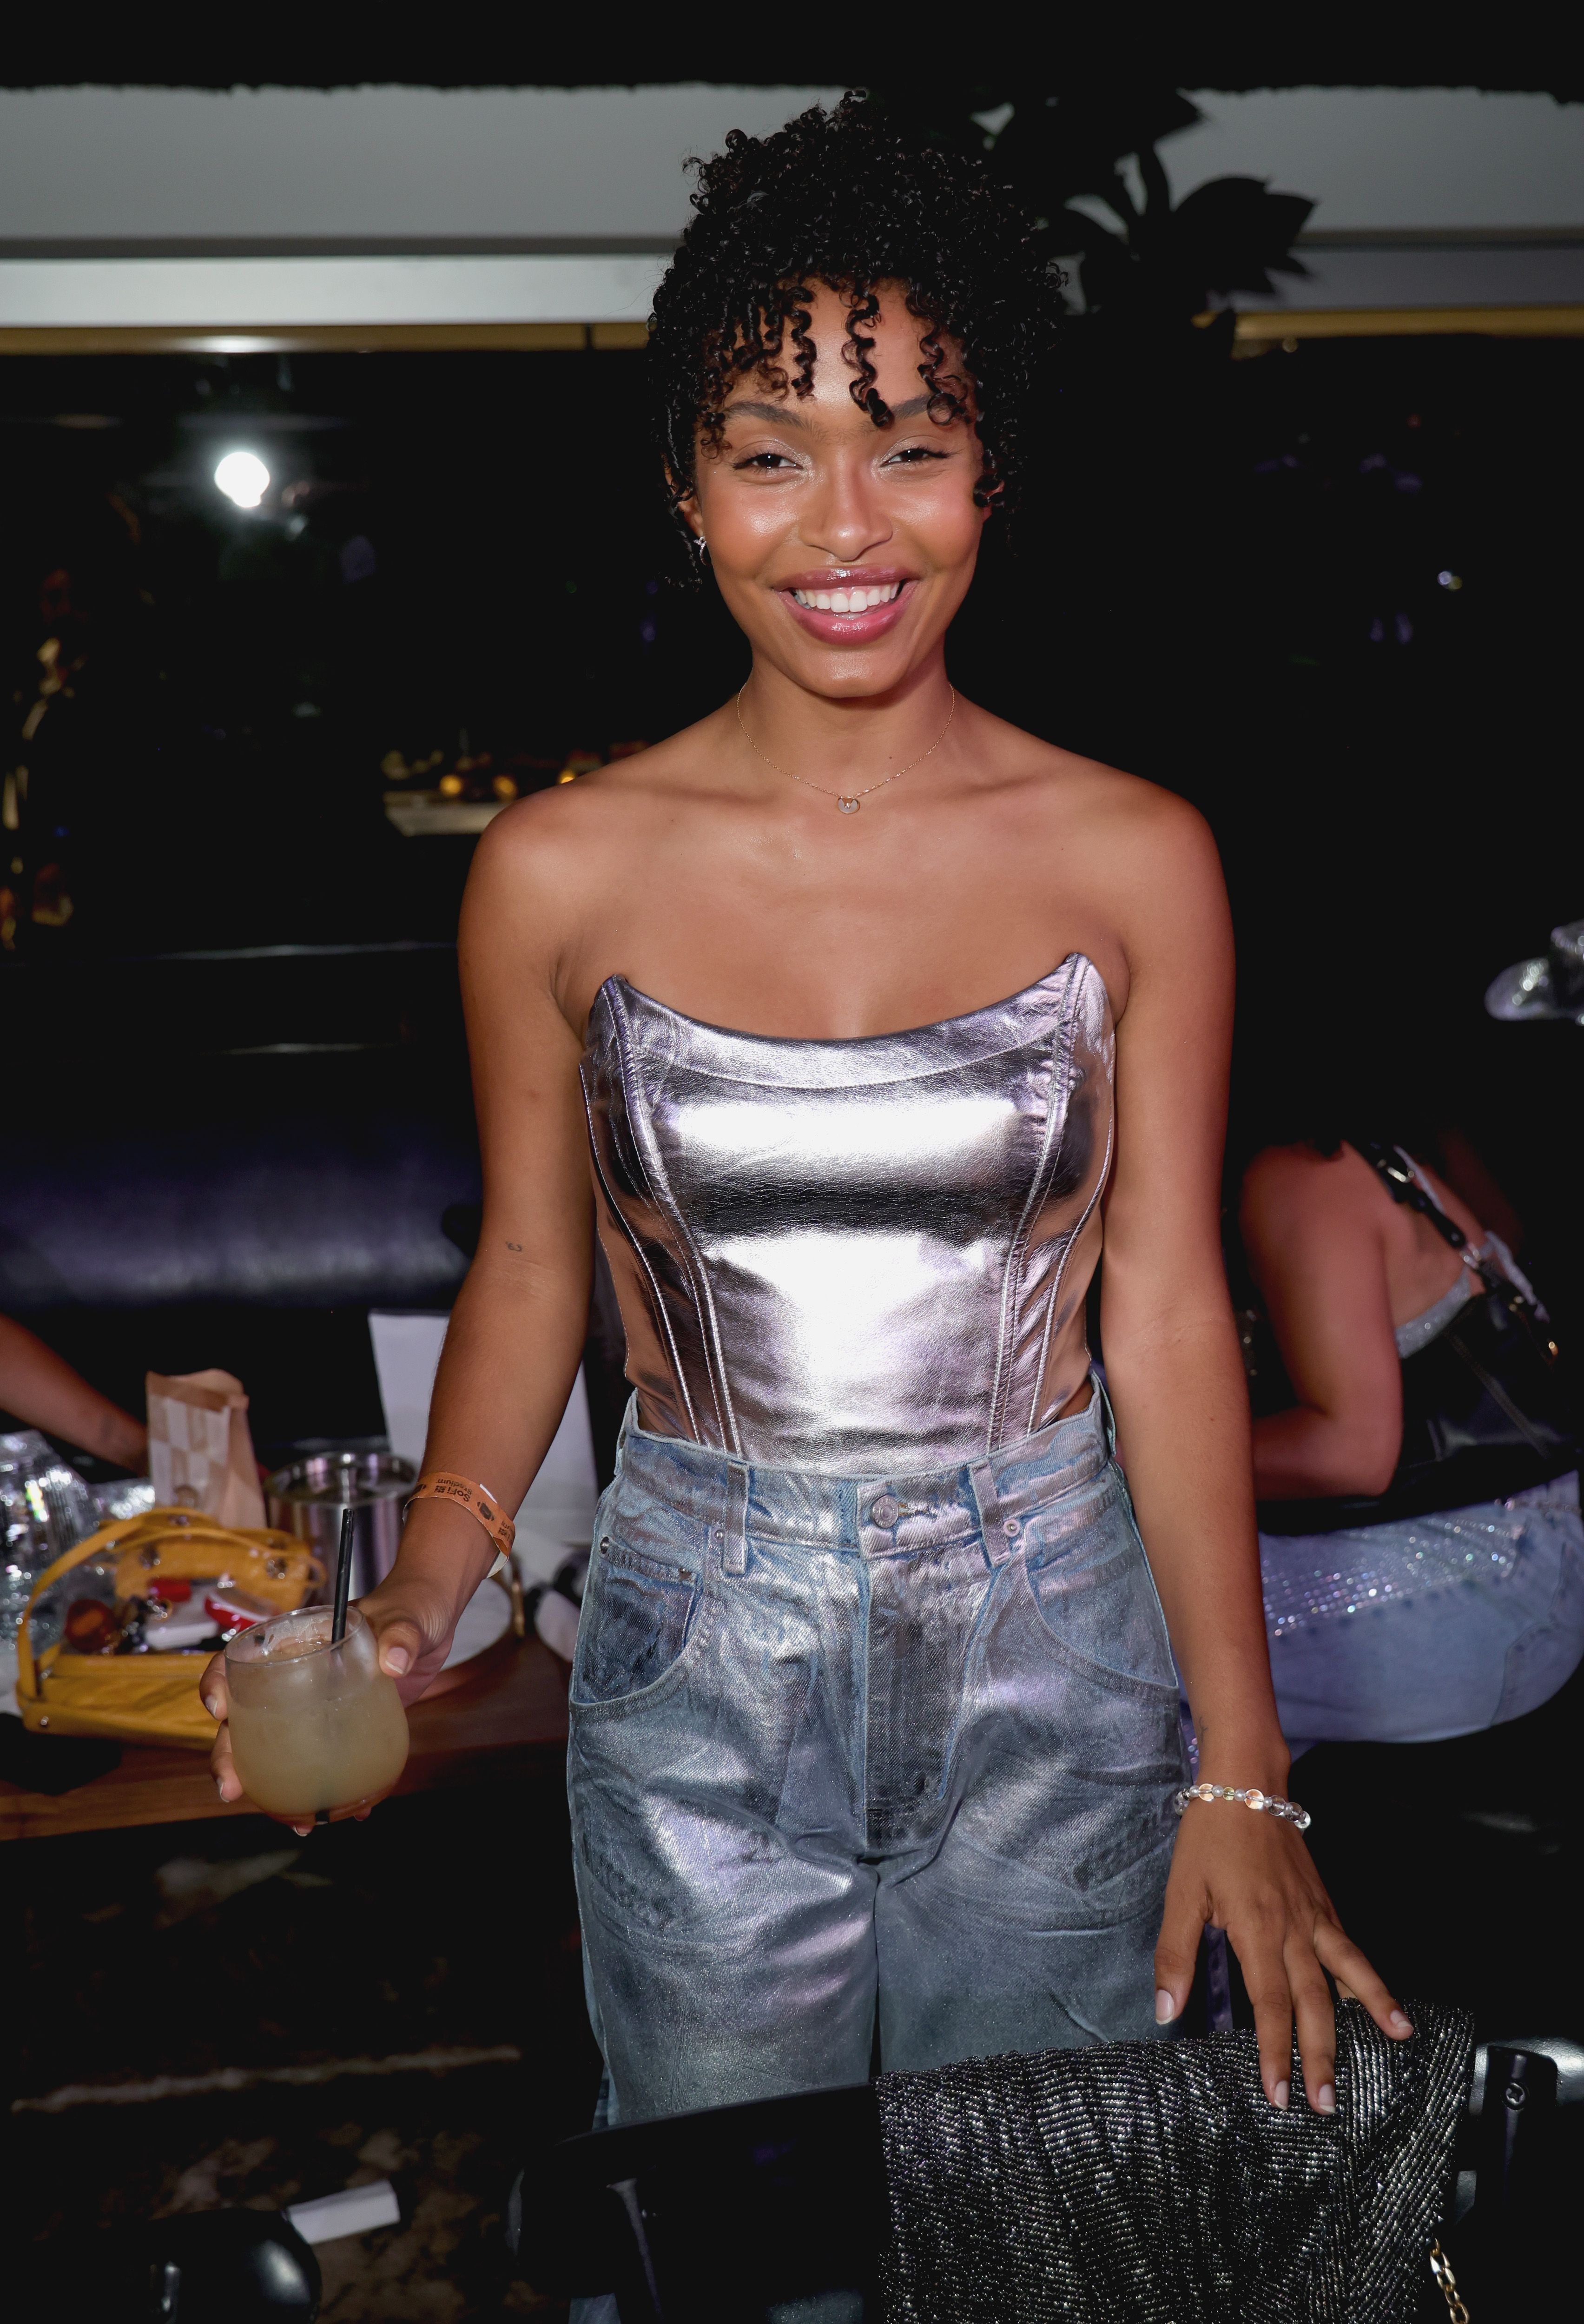 Yara Shahidi smiles for a photo as she holds a drink